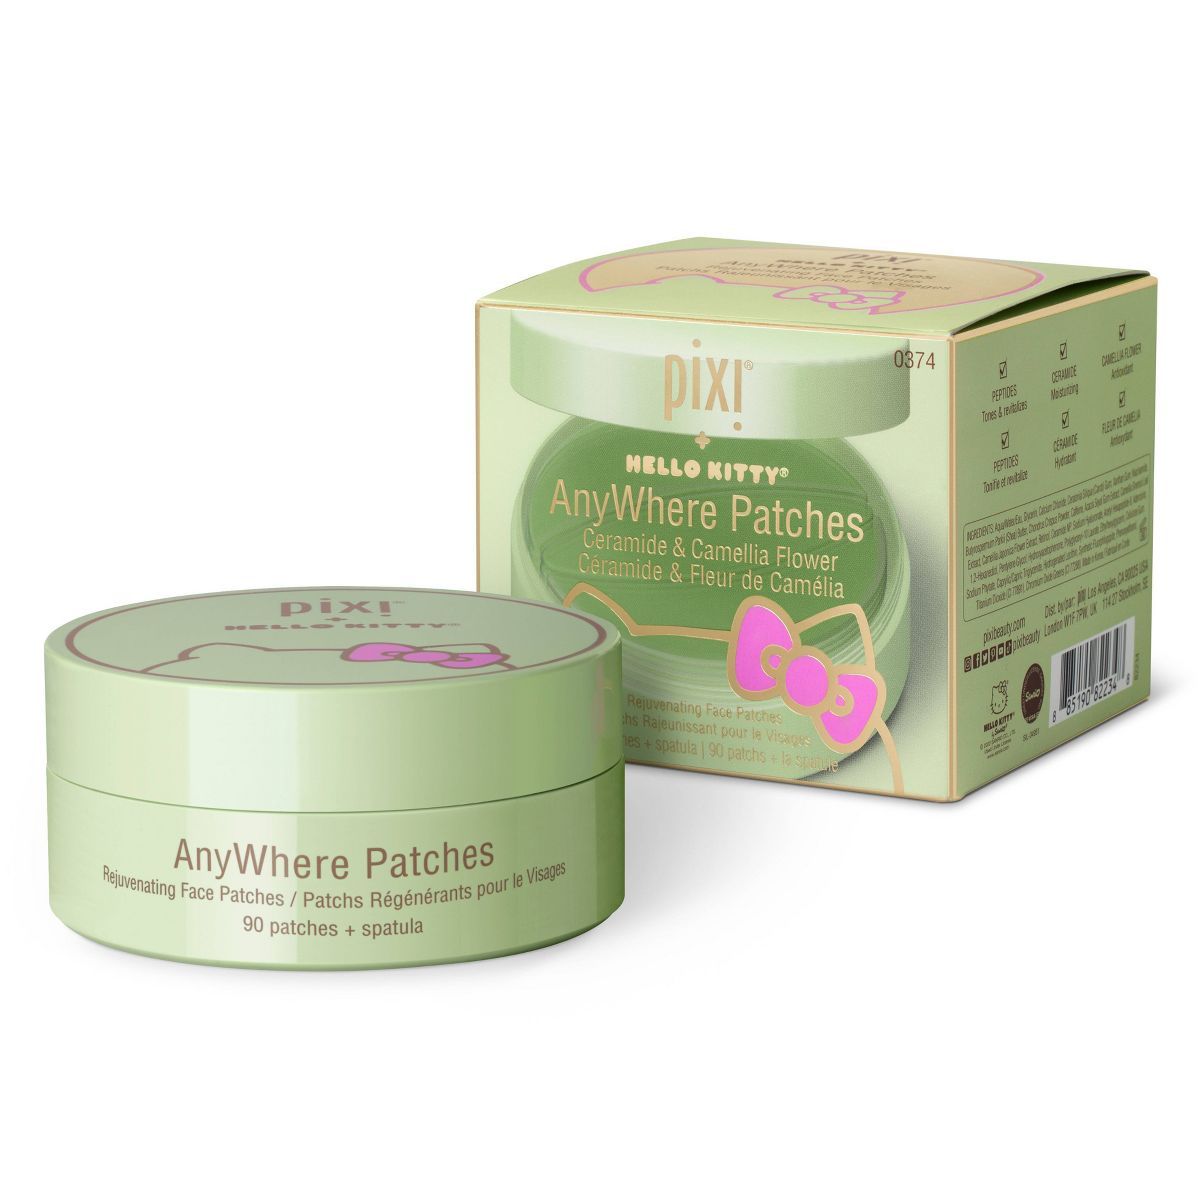 Pixi + Hello Kitty Anywhere Rejuvenating Face Patches - 90ct | Target